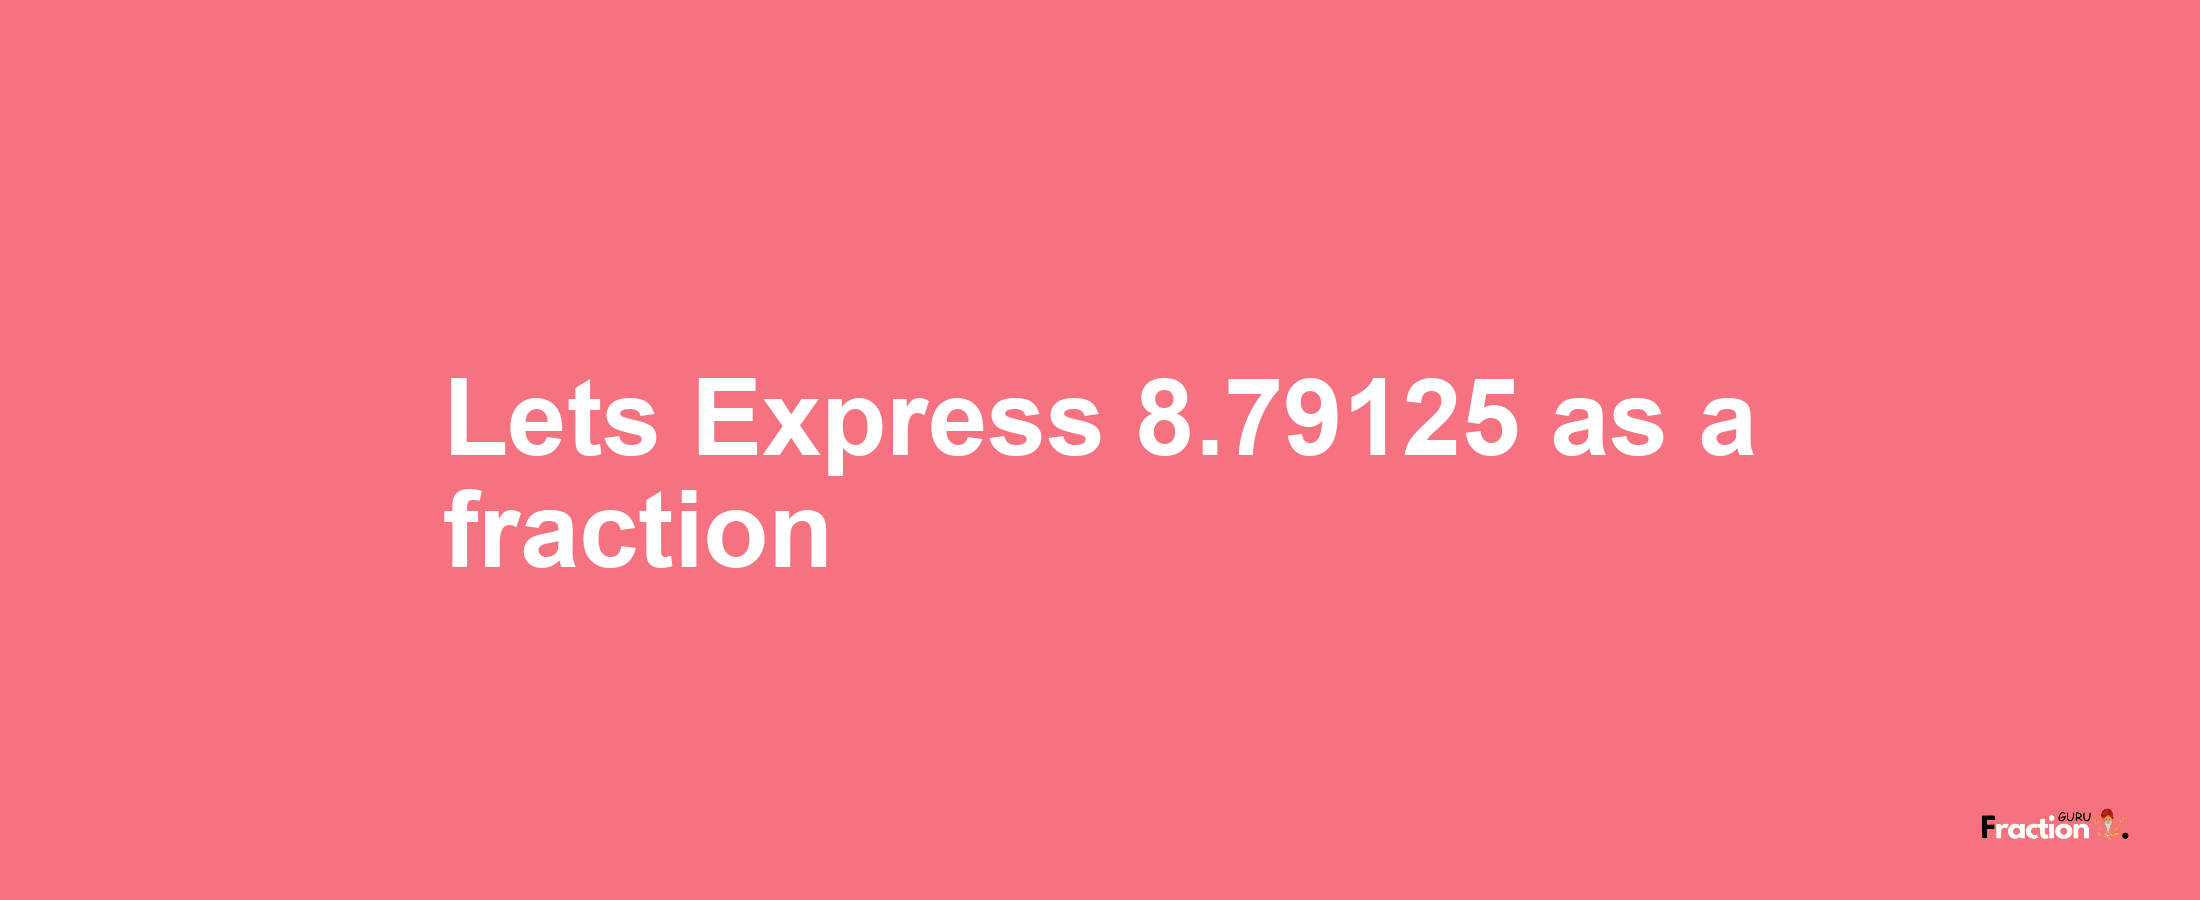 Lets Express 8.79125 as afraction